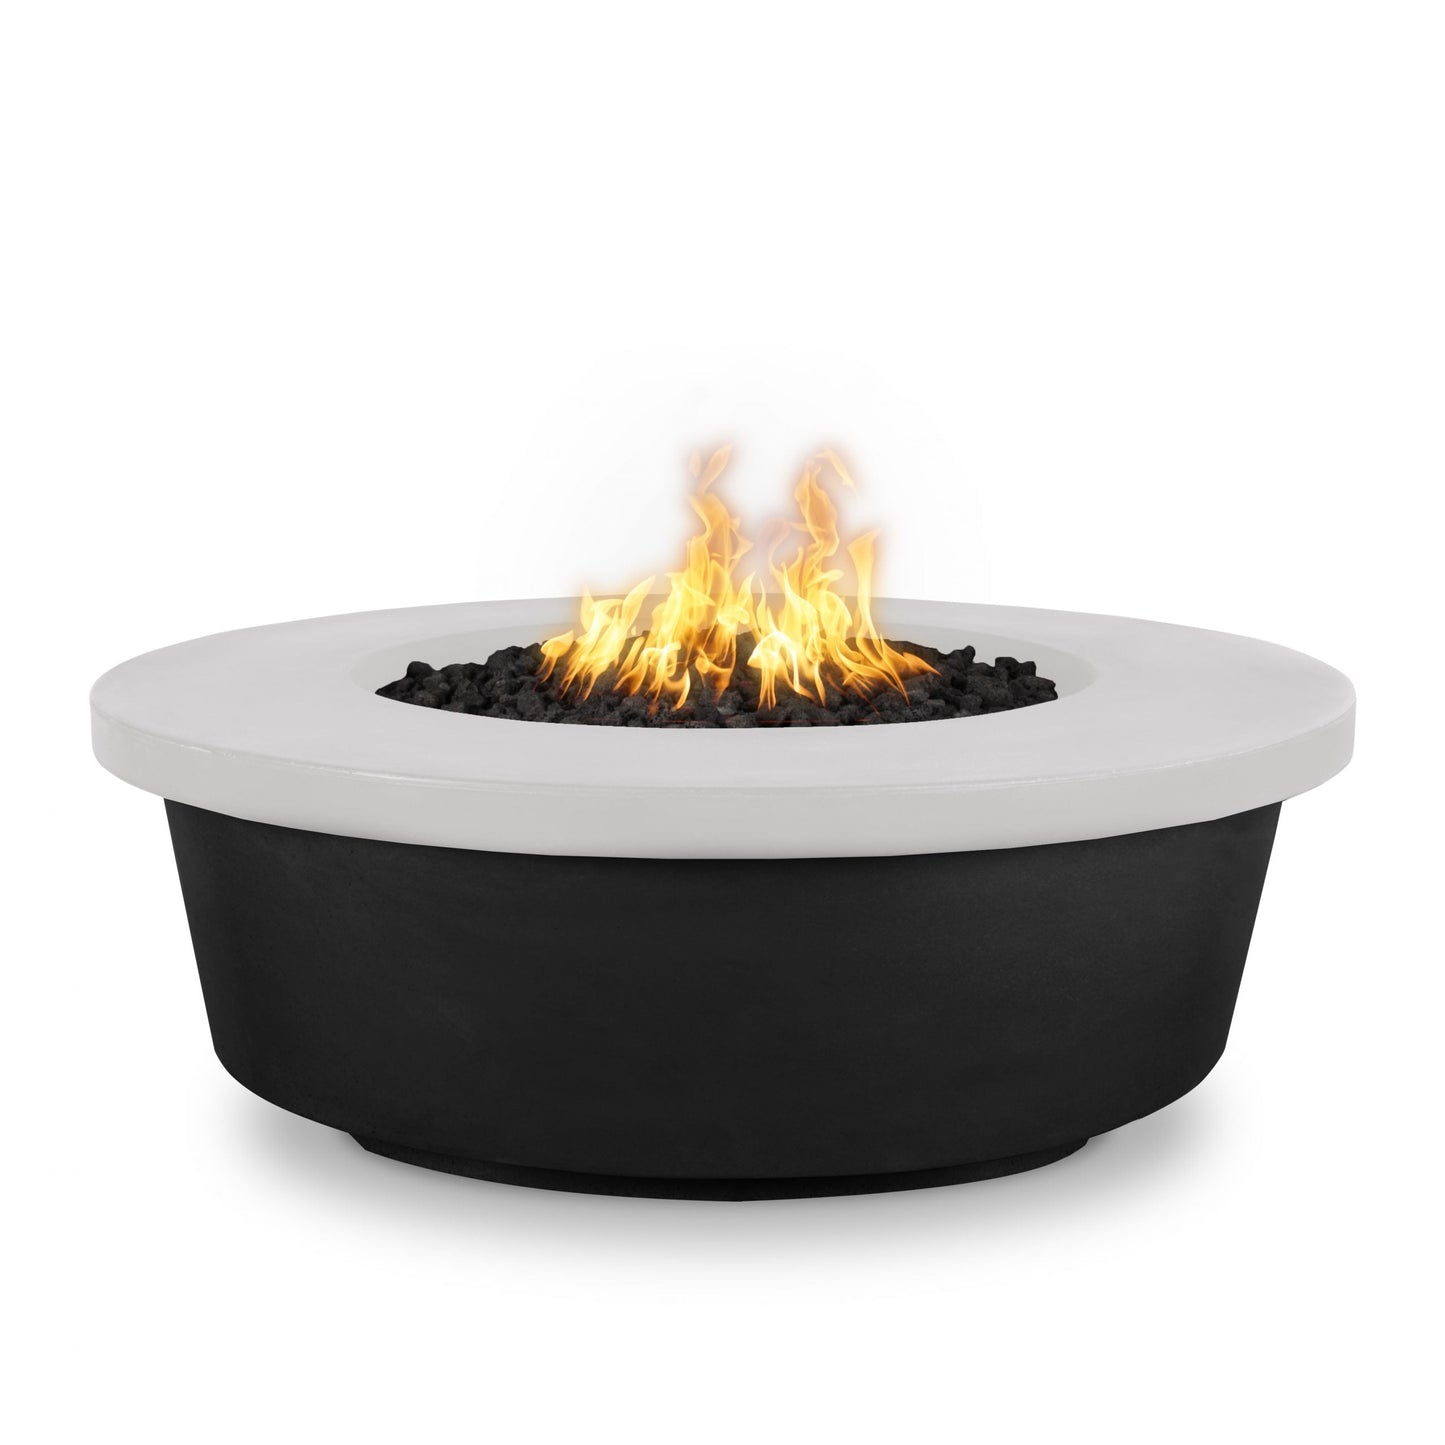 The Outdoor Plus Round Tempe 48" Black & White Powder Coated Liquid Propane Fire Pit with Match Lit with Flame Sense Ignition